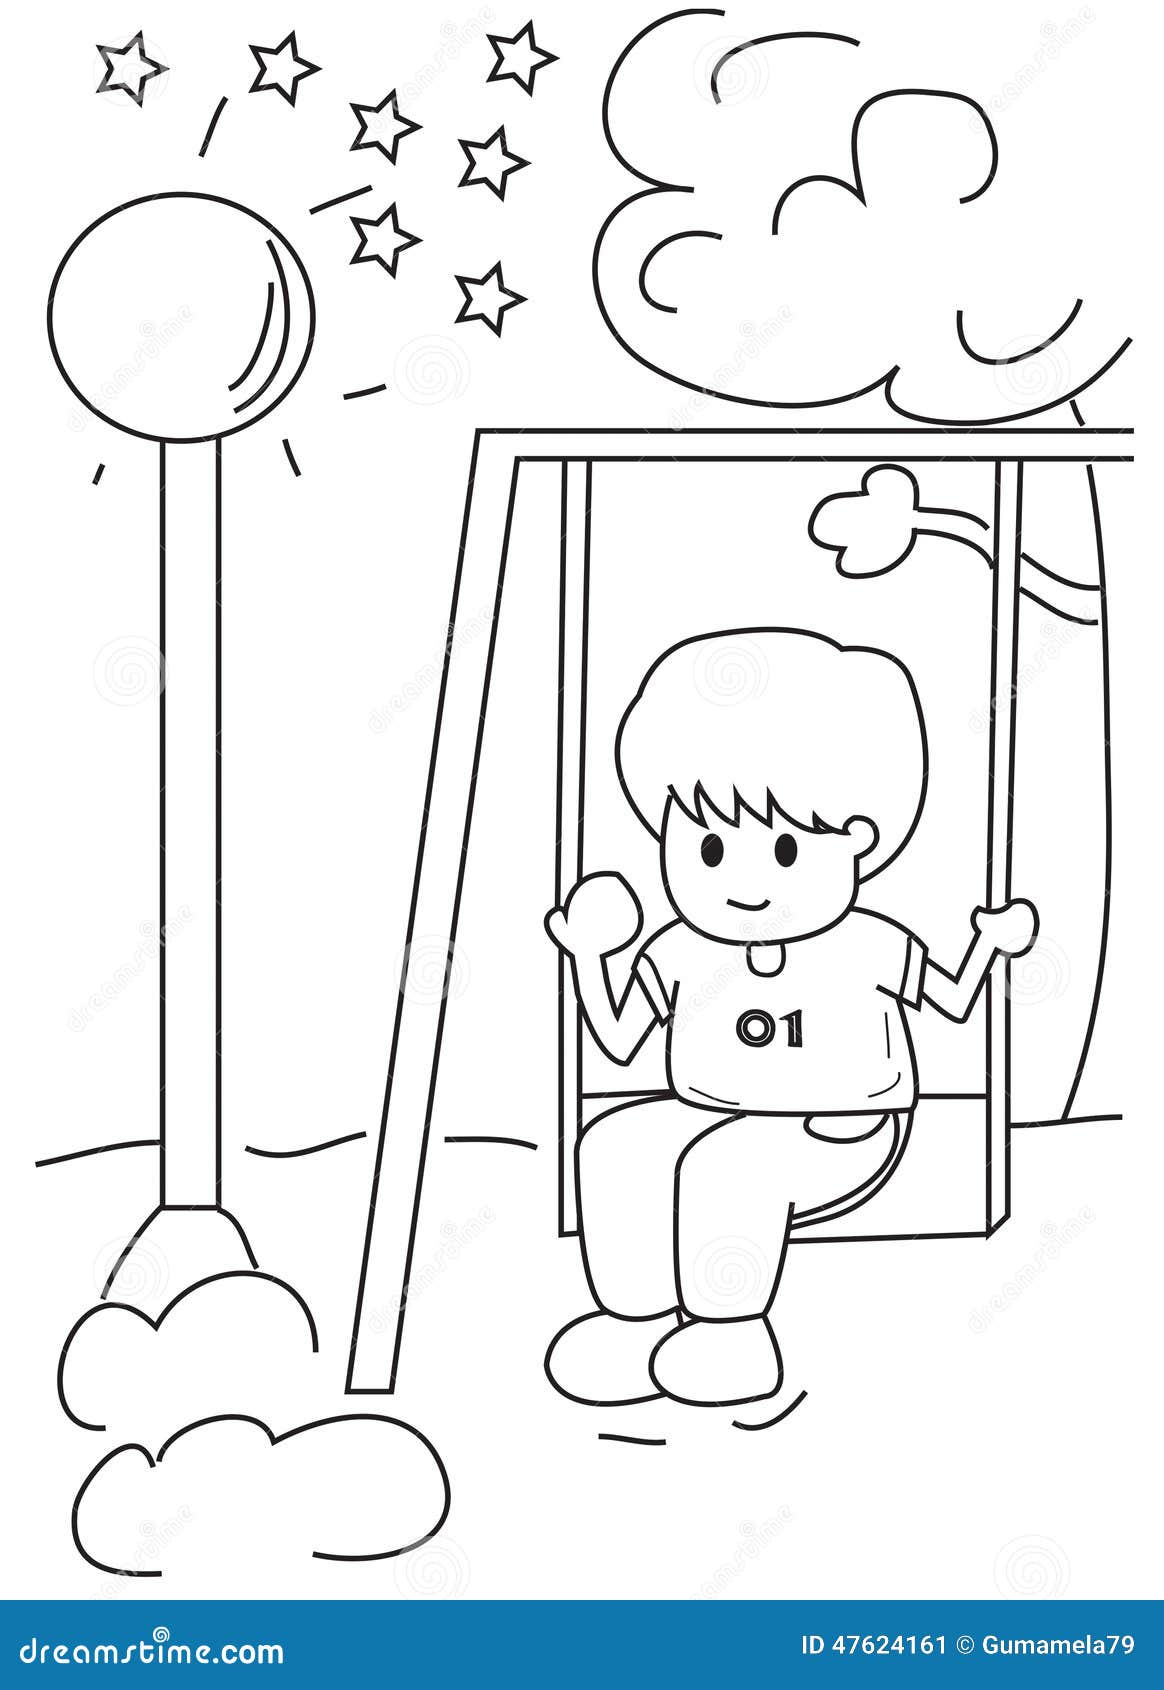 Hand drawn coloring page of a boy on a swing stock illustration